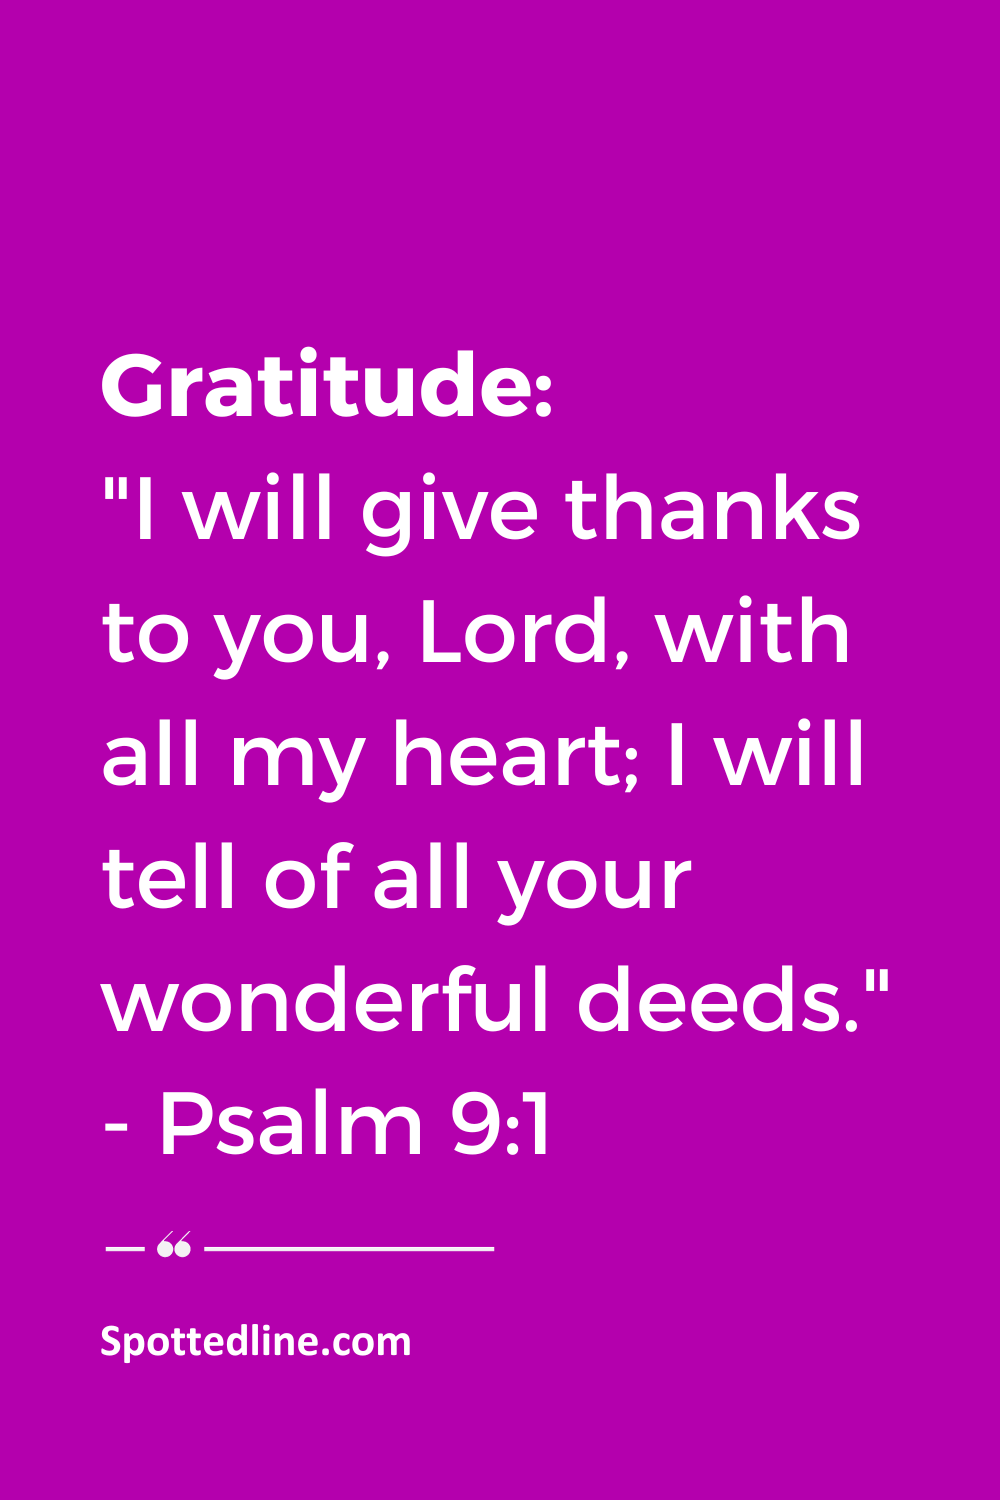 Gratitude Give Thanks to The Lord